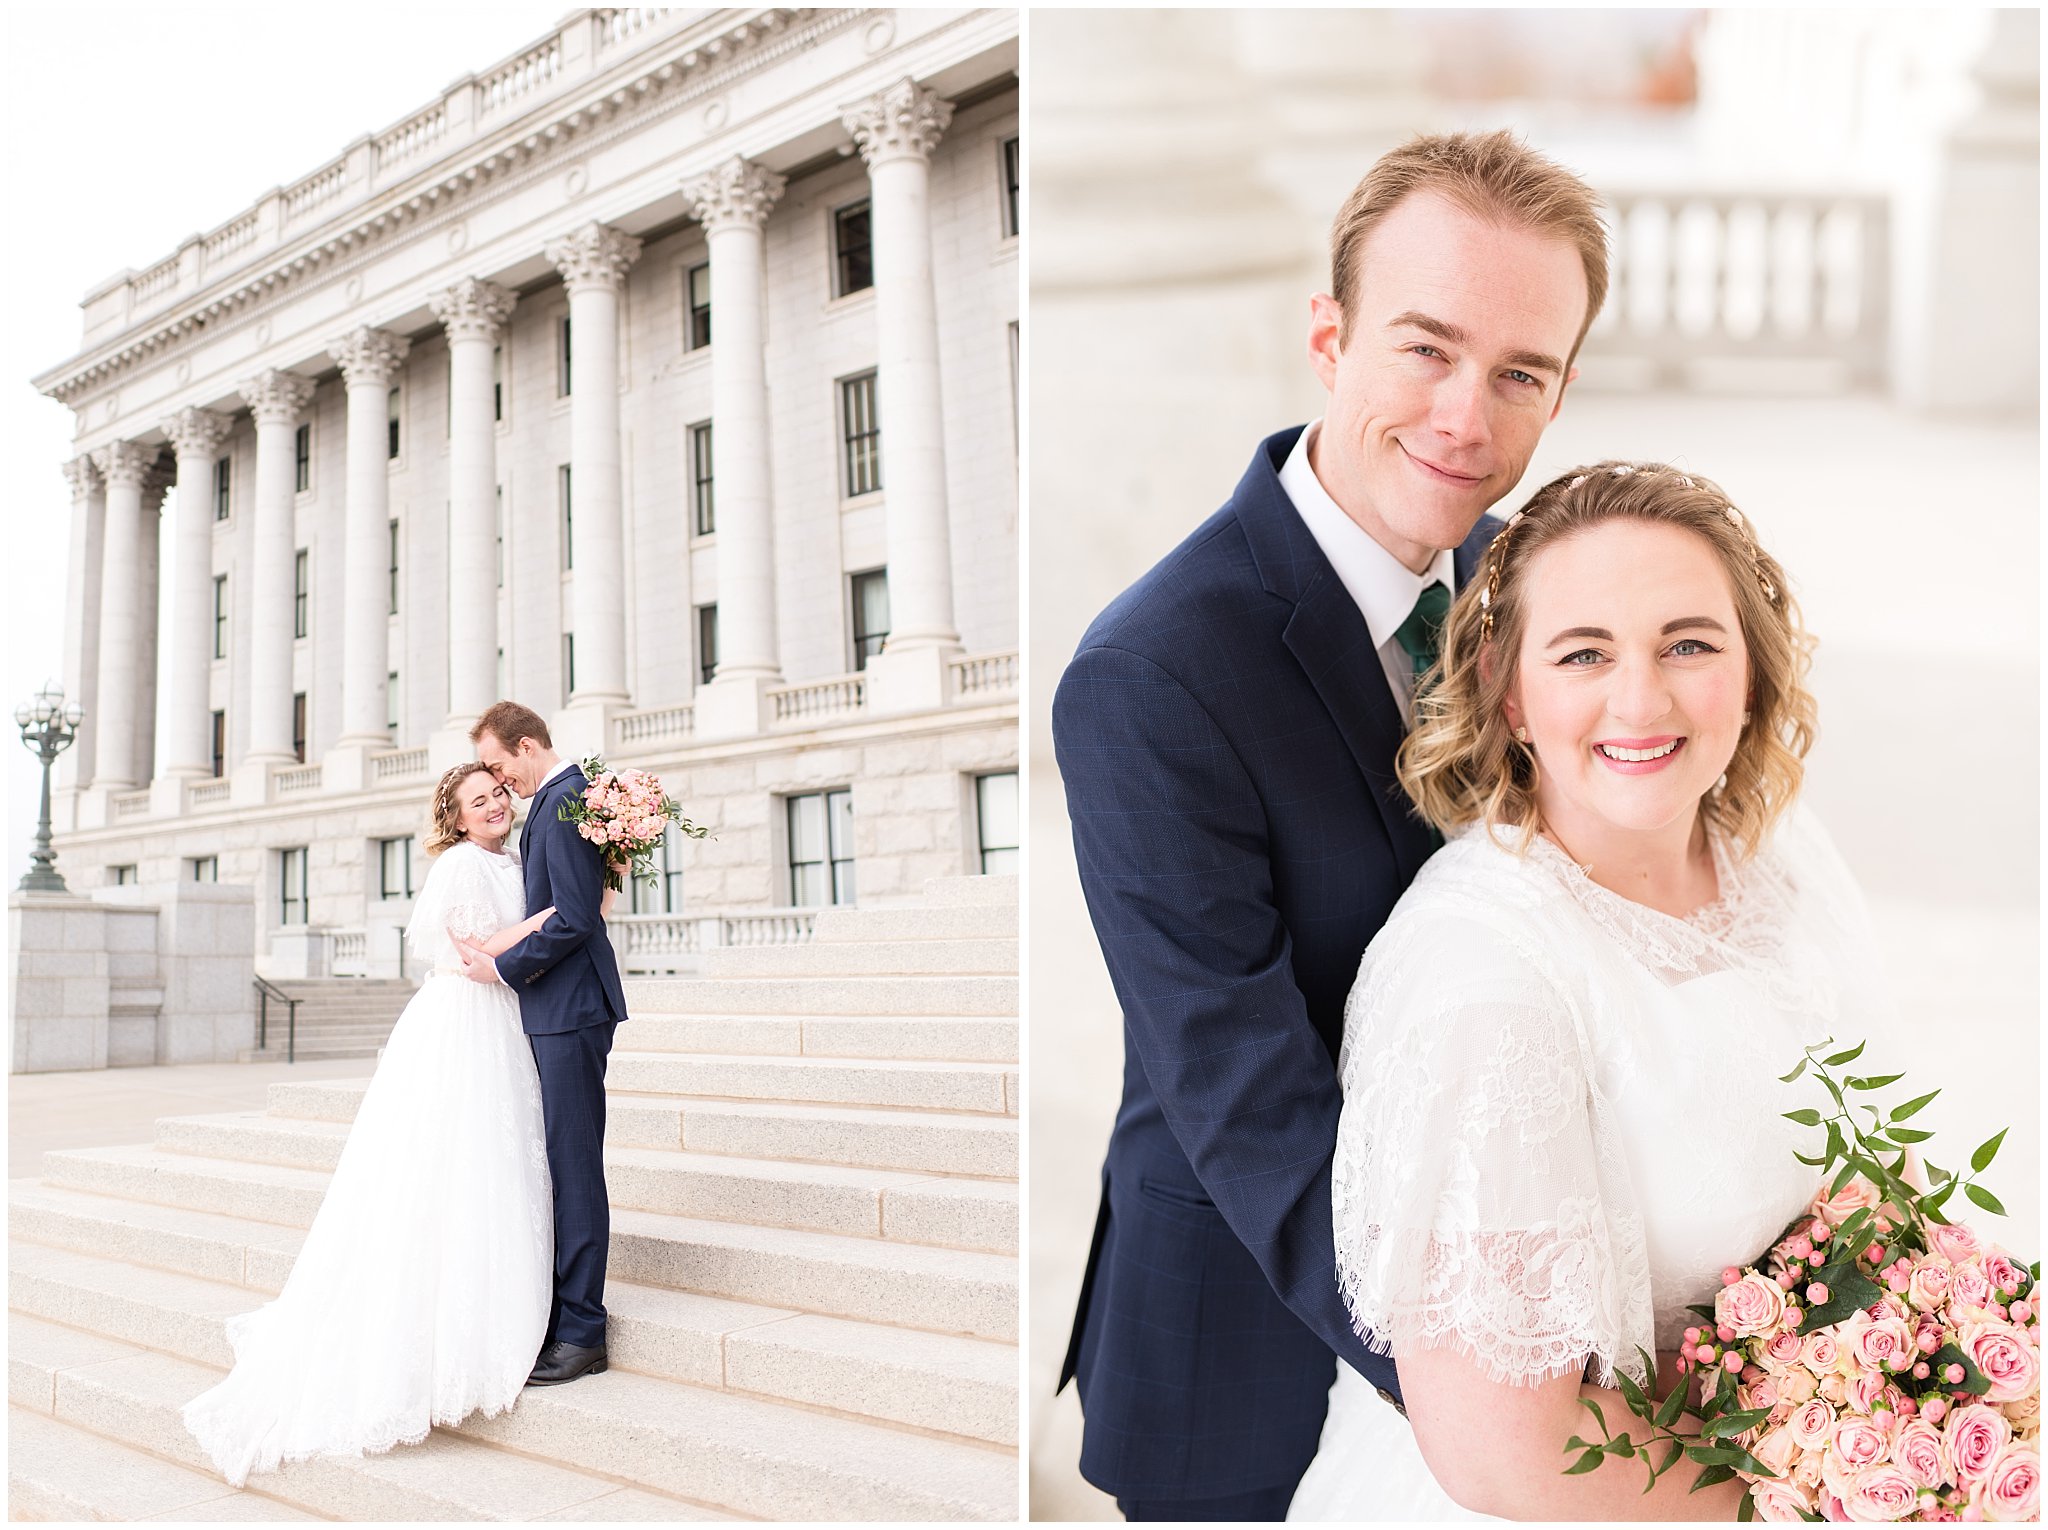 Bride and groom on capitol building steps | Winter Formals at the Utah State Capitol | Utah Wedding Photography